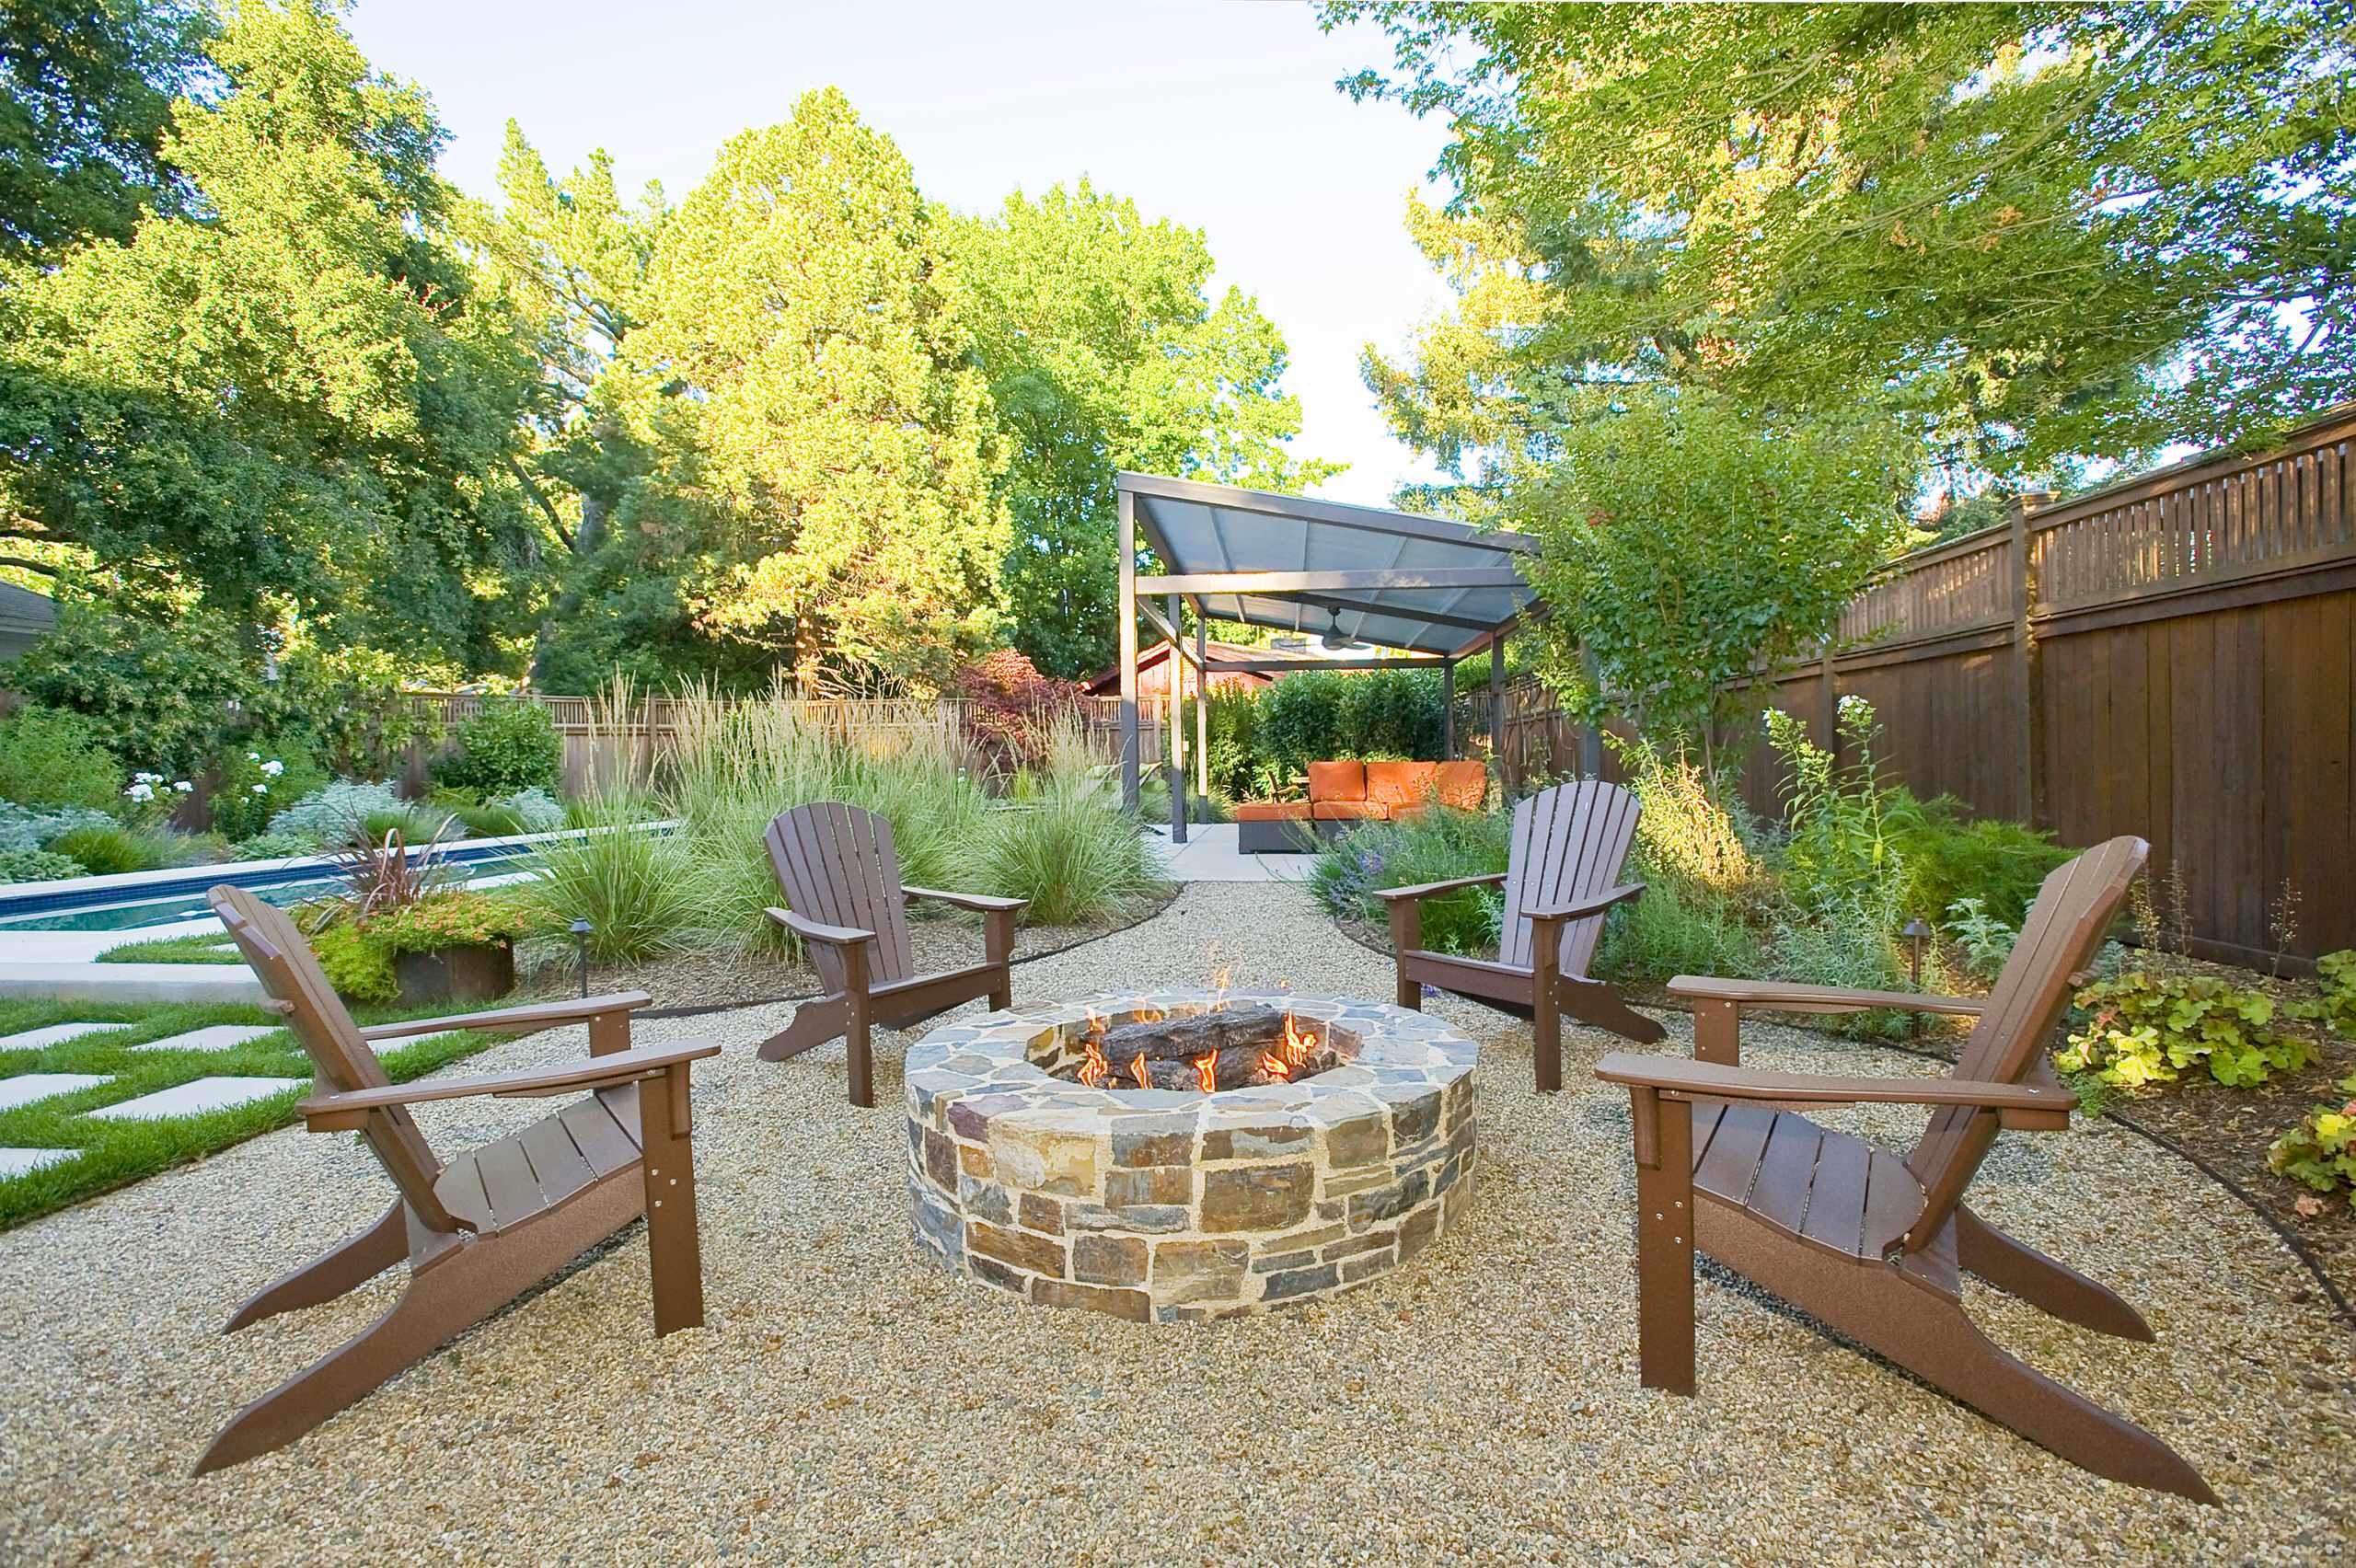 Do You Want a Pea Gravel Patio? This is What You Need to Know…